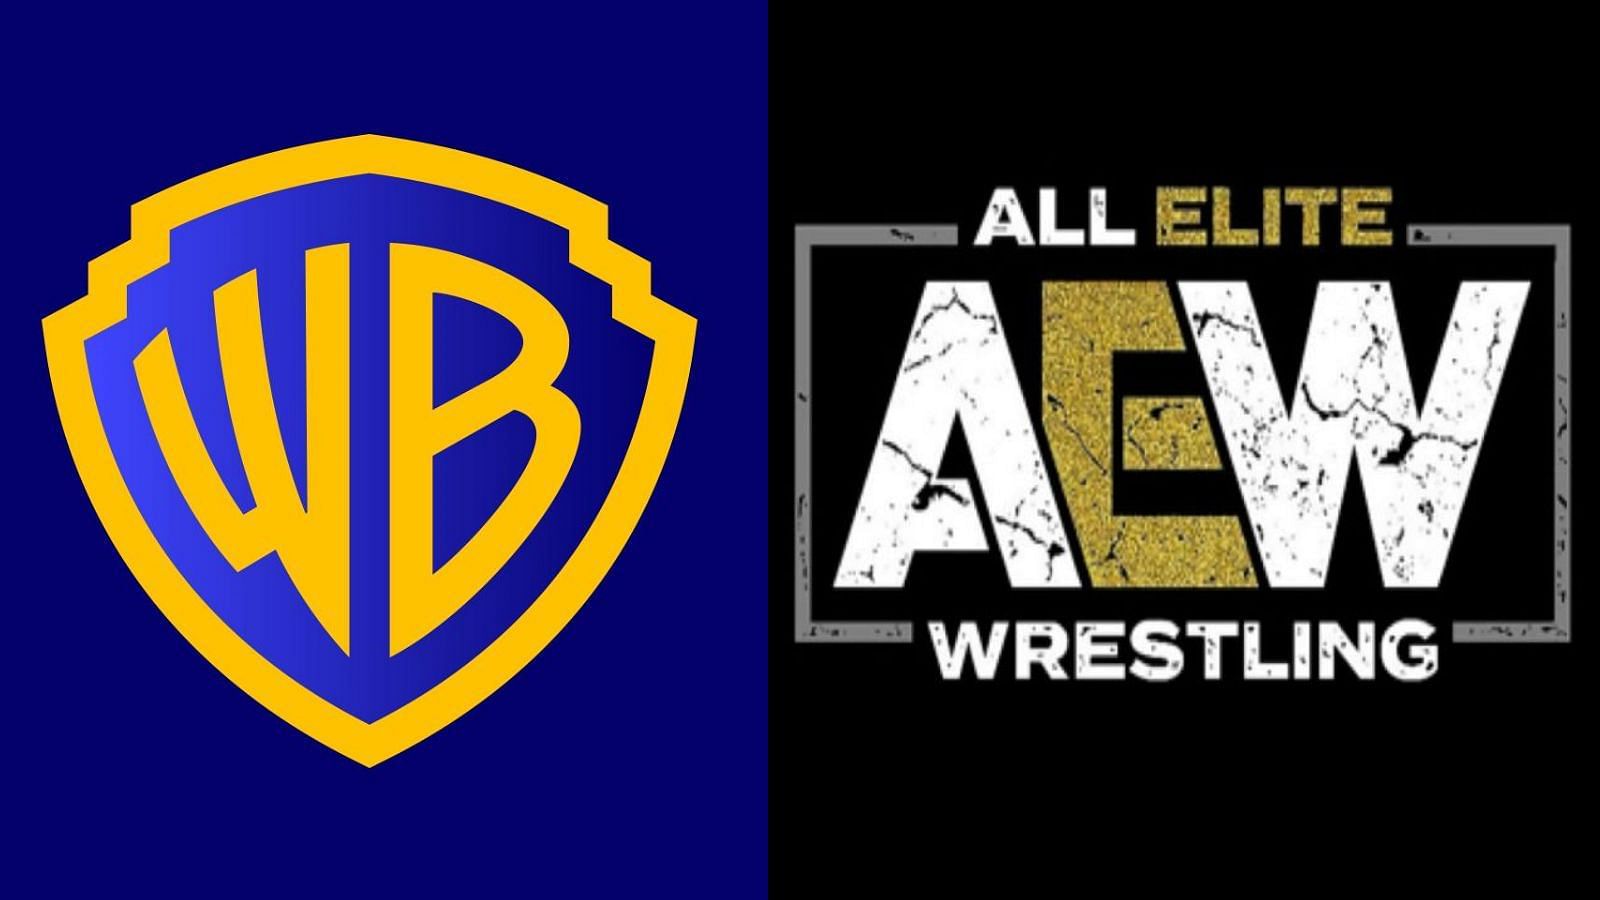 The Discovery/Warner Bros. merger could have bigger consequences for AEW.